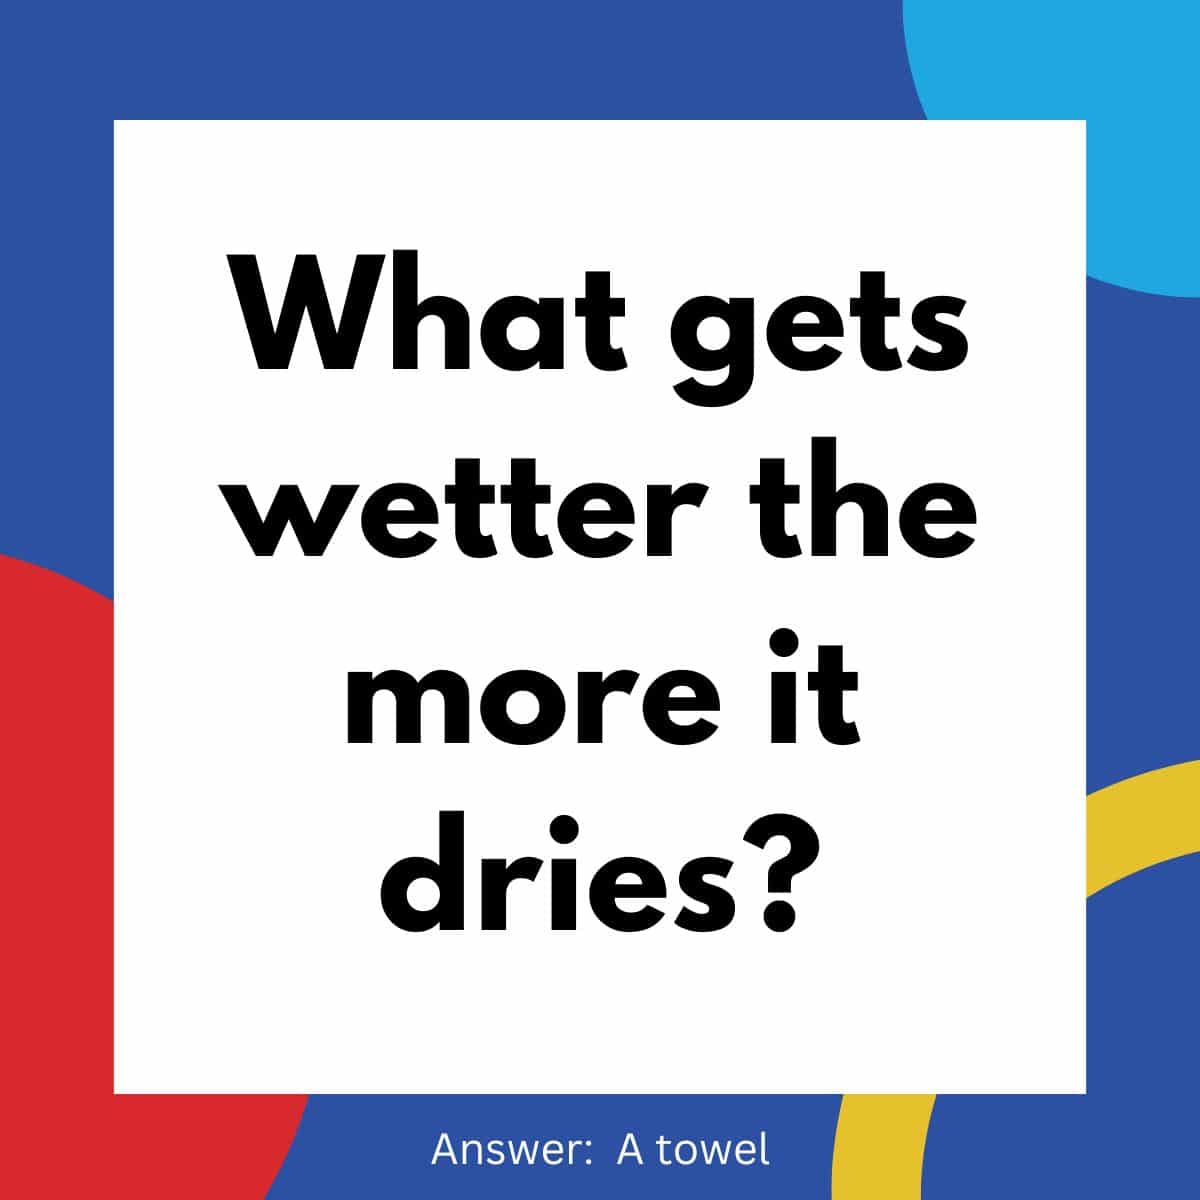 What gets wetter the more it drips? answer towel.